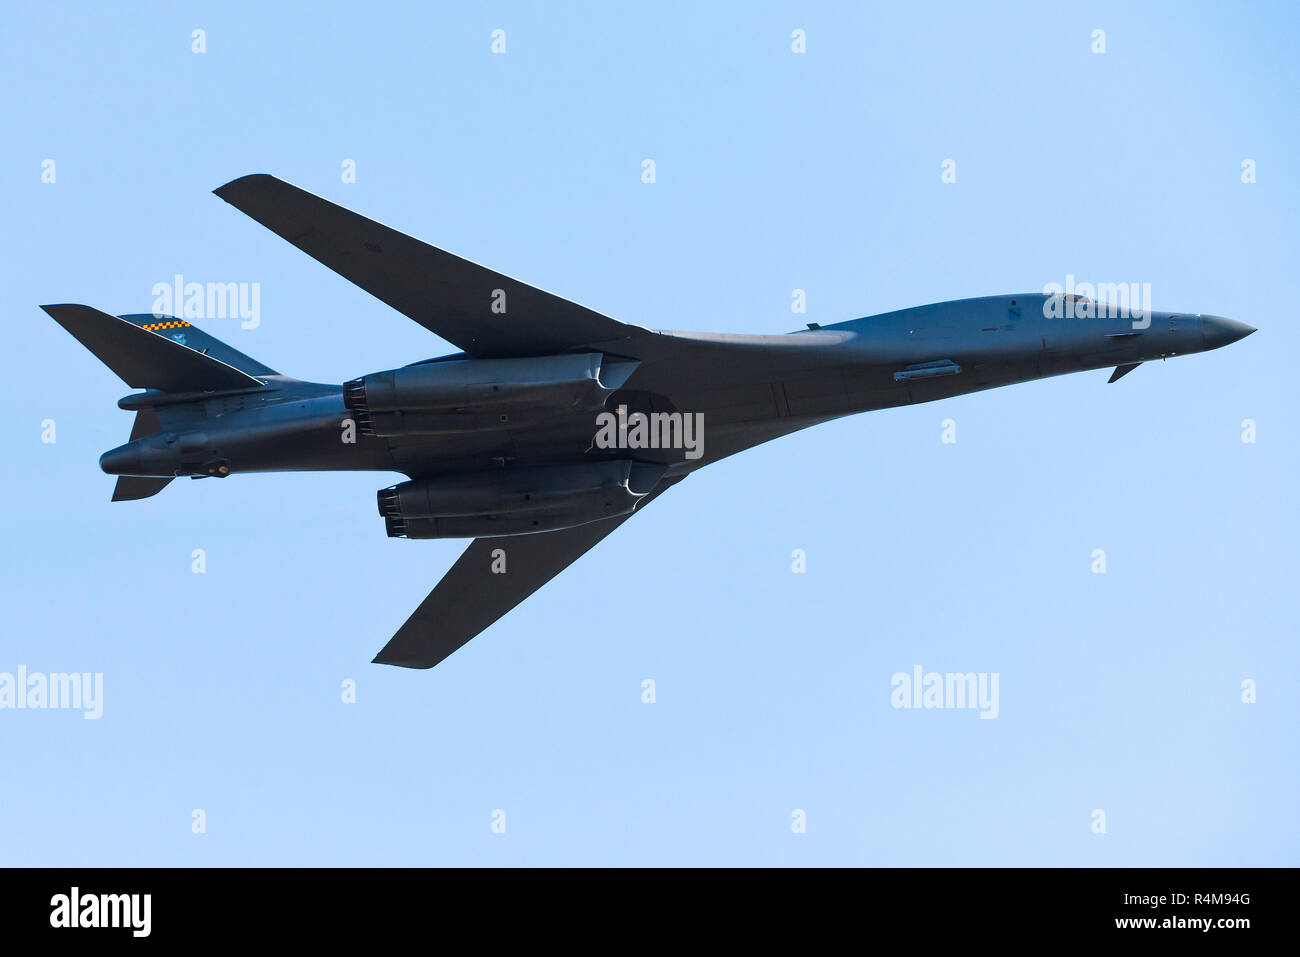 A Rockwell B-1 Lancer heavy bomber from the Air Force Global Strike Command of the United States Air Force. Stock Photo